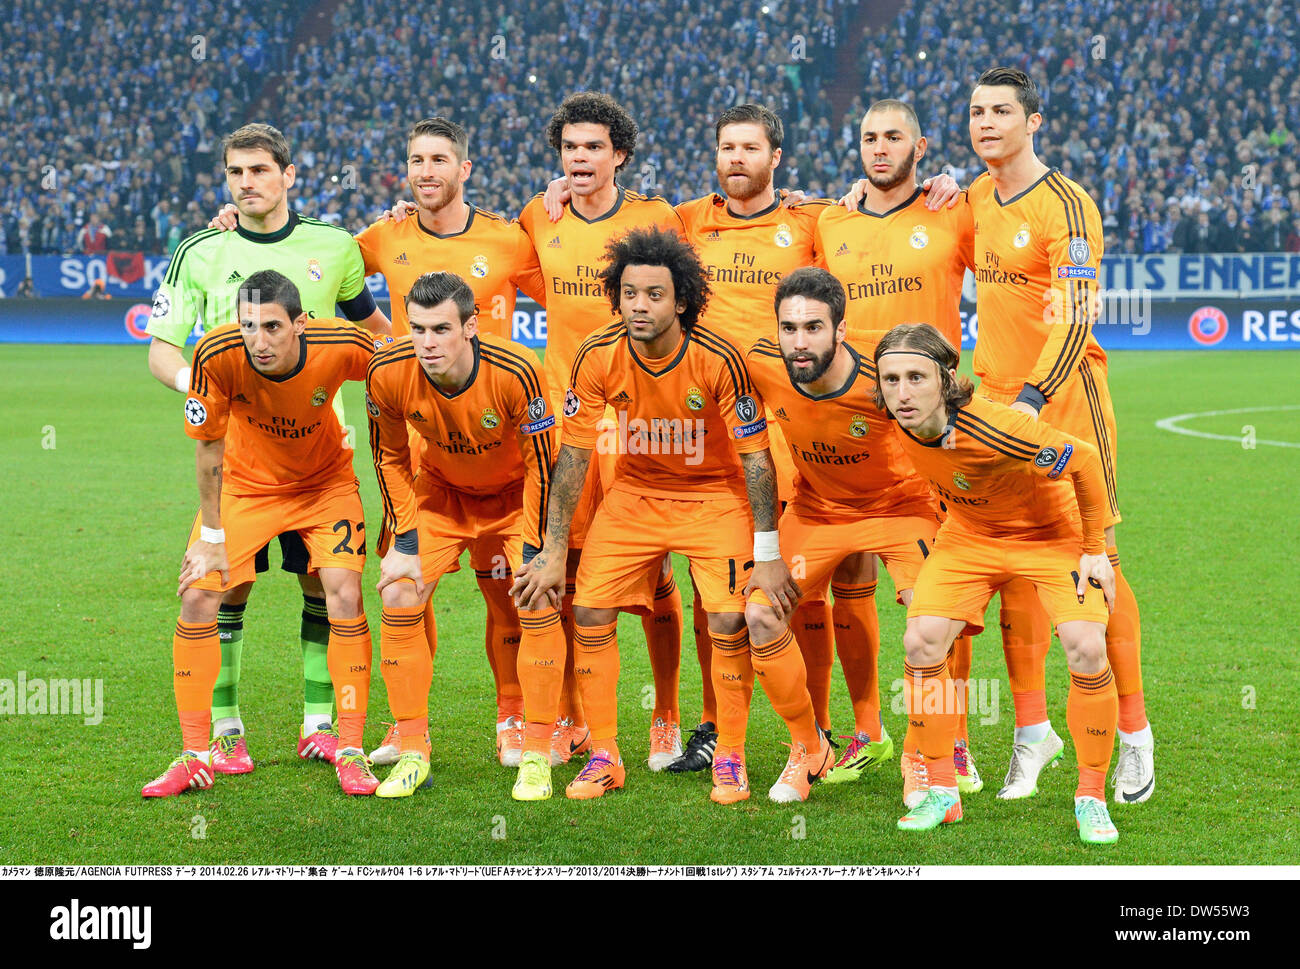 Gelsenkirchen, Germany. 26th Feb, 2014. Real Madrid team group line-up Football / Soccer : Real Madrid team group shot (Top row - L to R) Iker Casillas, Sergio Ramos, Pepe, Xabi Alonso, Karim Benzema, Cristiano Ronaldo, (Bottom row - L to R) Angel Di Maria, Gareth Bale, Marcelo, Daniel Carvajal and Luka Modric before the UEFA Champions League Round of 16, 1st leg match between FC Schalke 04 1-6 Real Madrid at Veltins-Arena in Gelsenkirchen, Germany . Credit:  Takamoto Tokuhara/AFLO/Alamy Live News Stock Photo